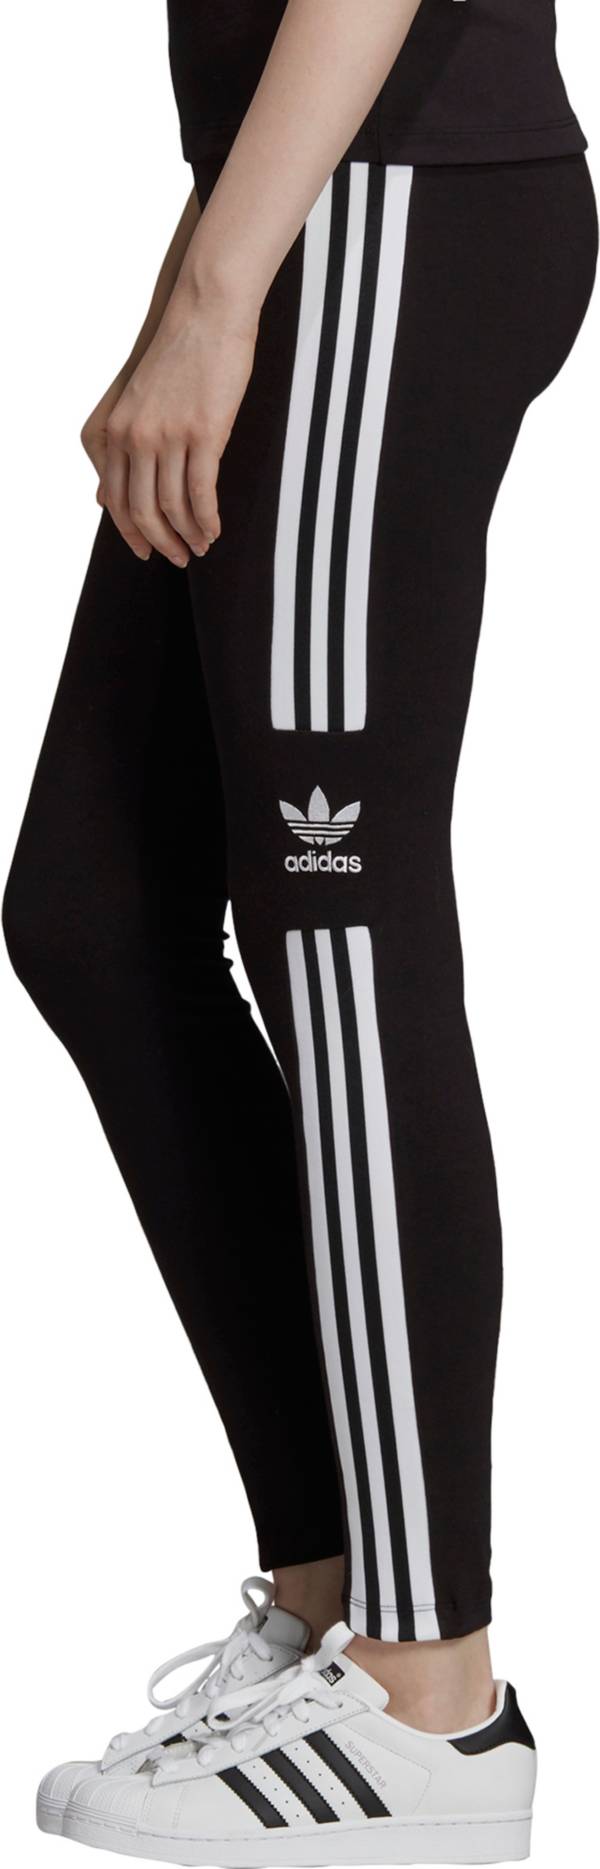 Adidas Trefoil Women's Tights Red